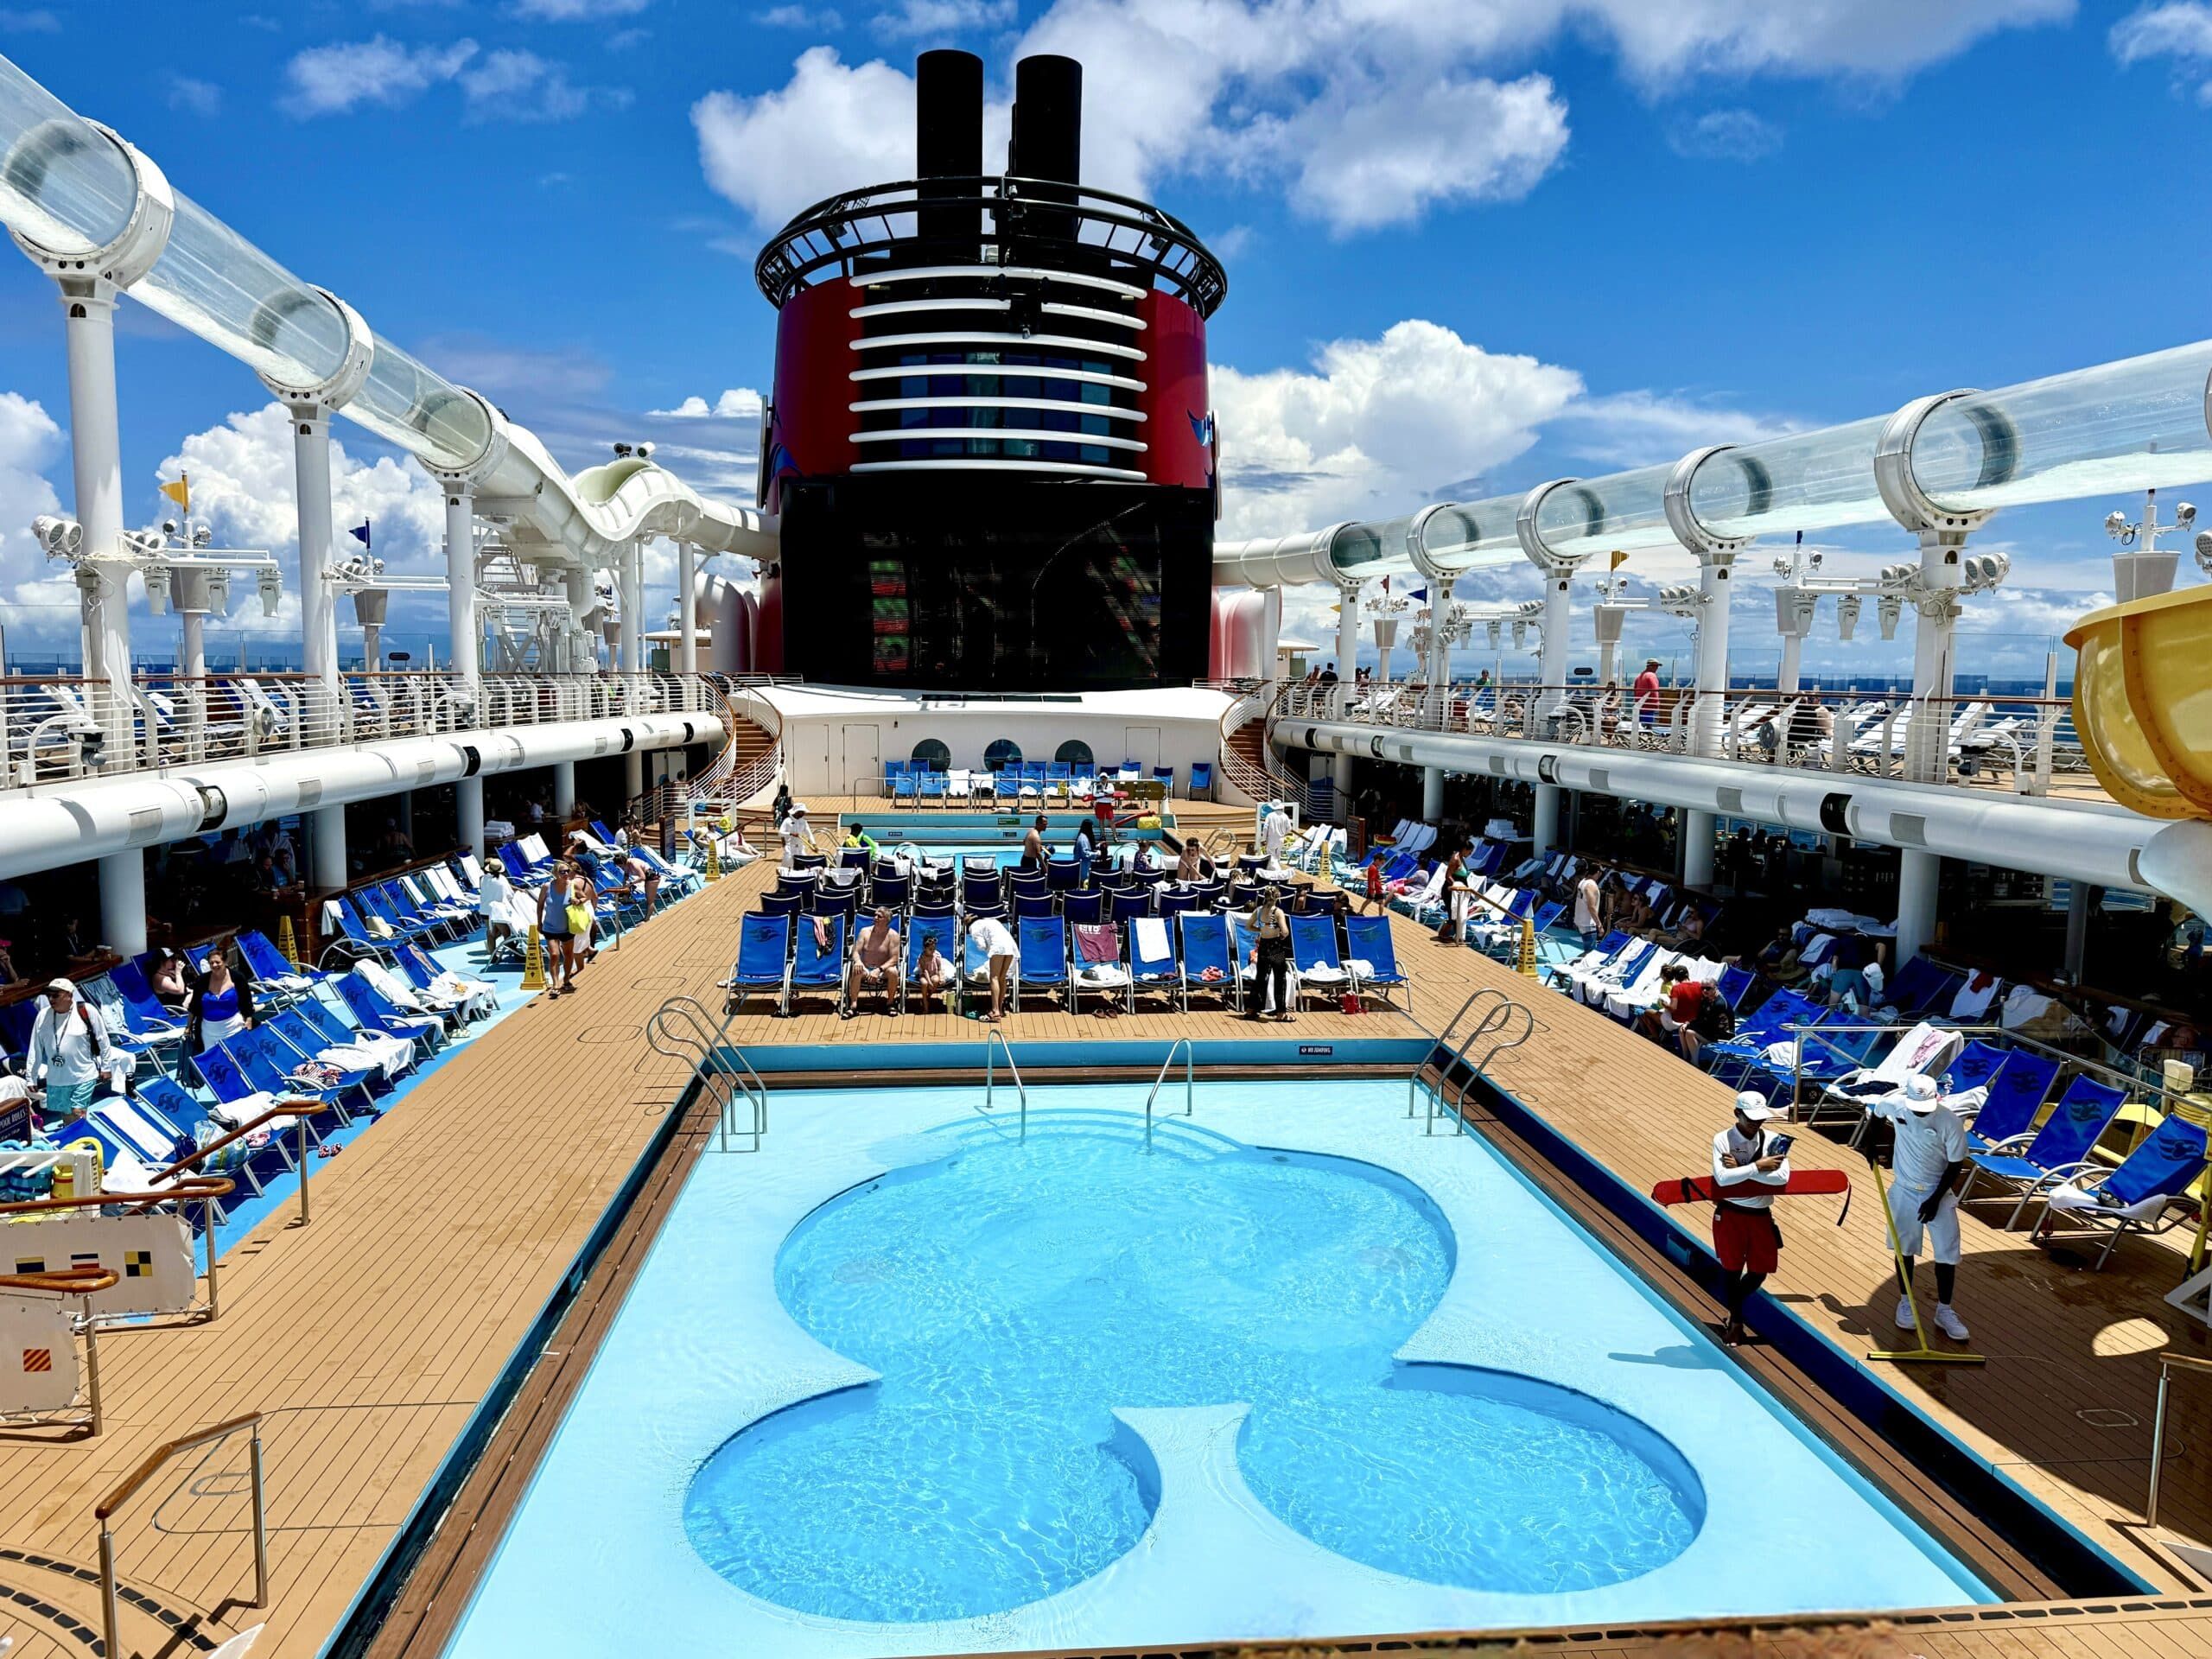 We Took a Disney Fantasy Cruise to Lookout Cay - Here's Our Day-By-Day Cruise Review